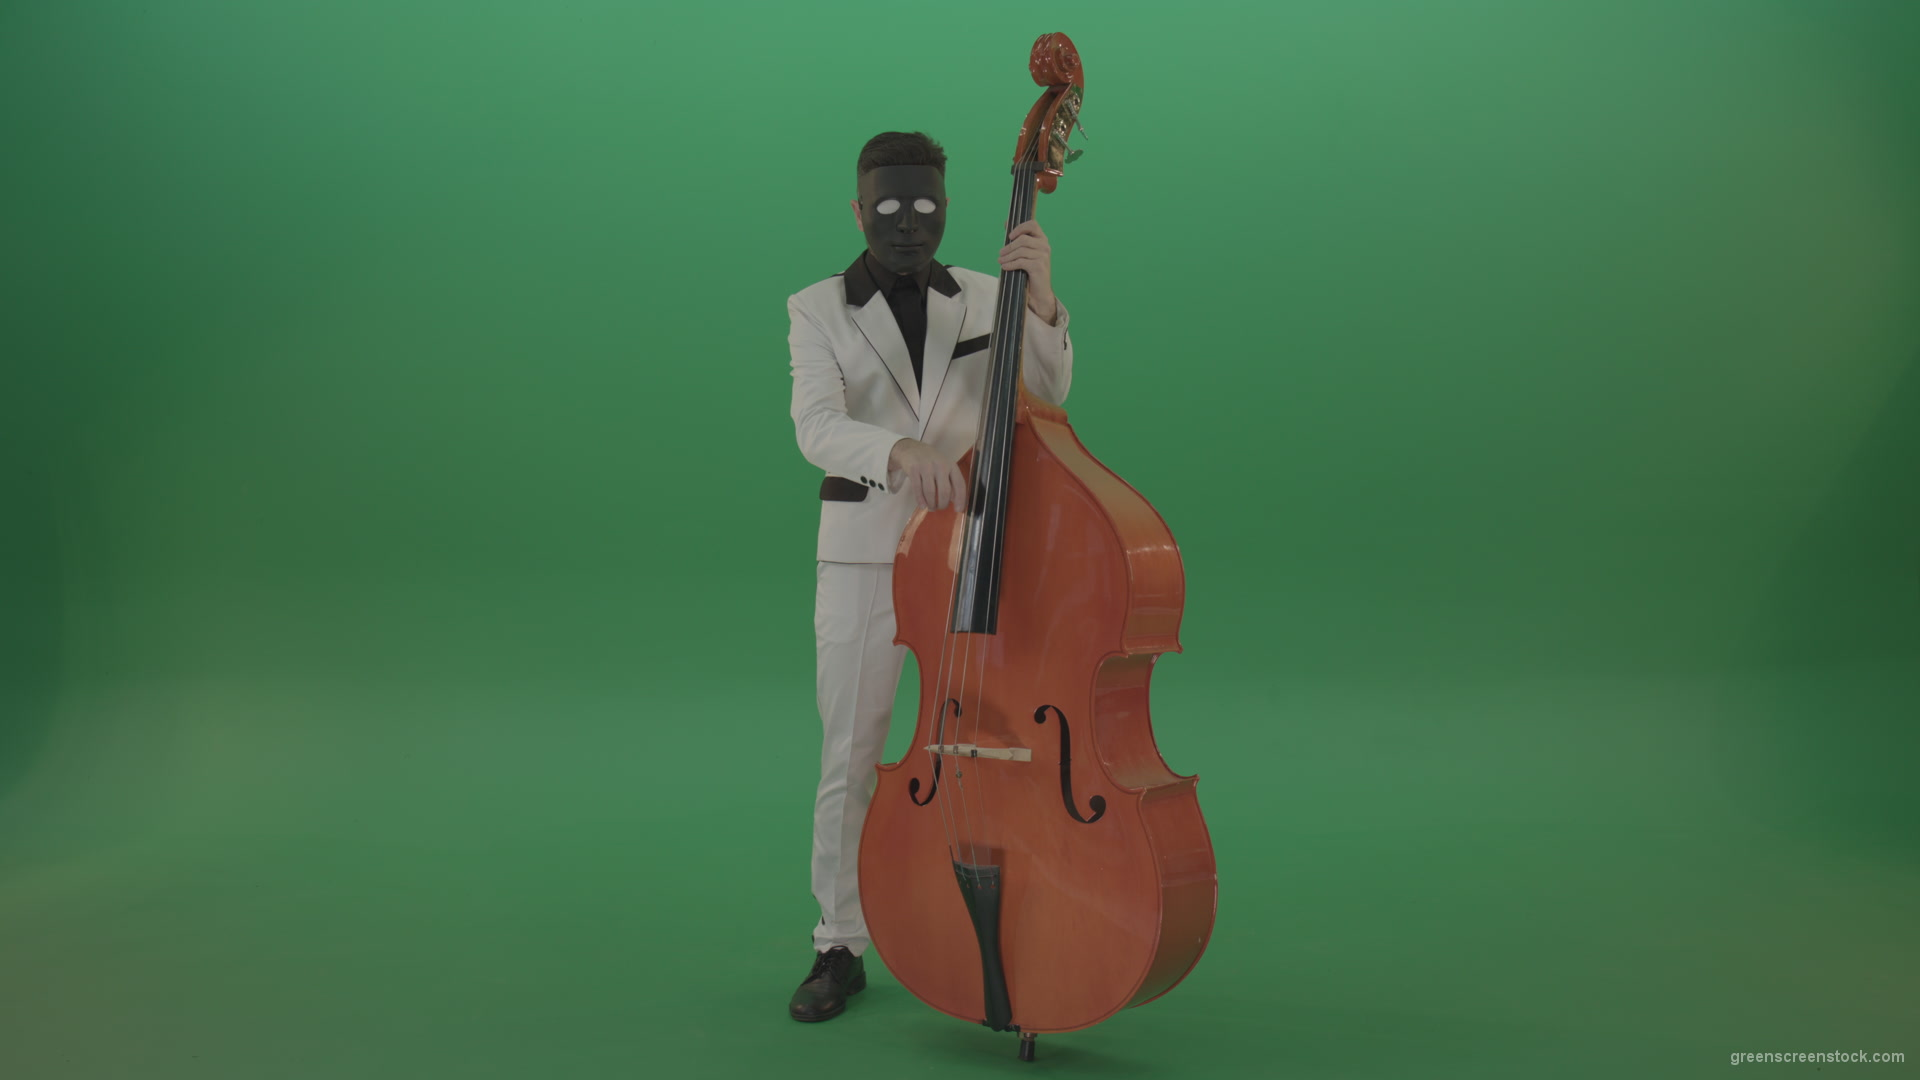 Man-in-white-costume-and-blac-mask-play-jazz-music-on-double-bass-orchestra-music-instument-isolated-on-green-screen_006 Green Screen Stock